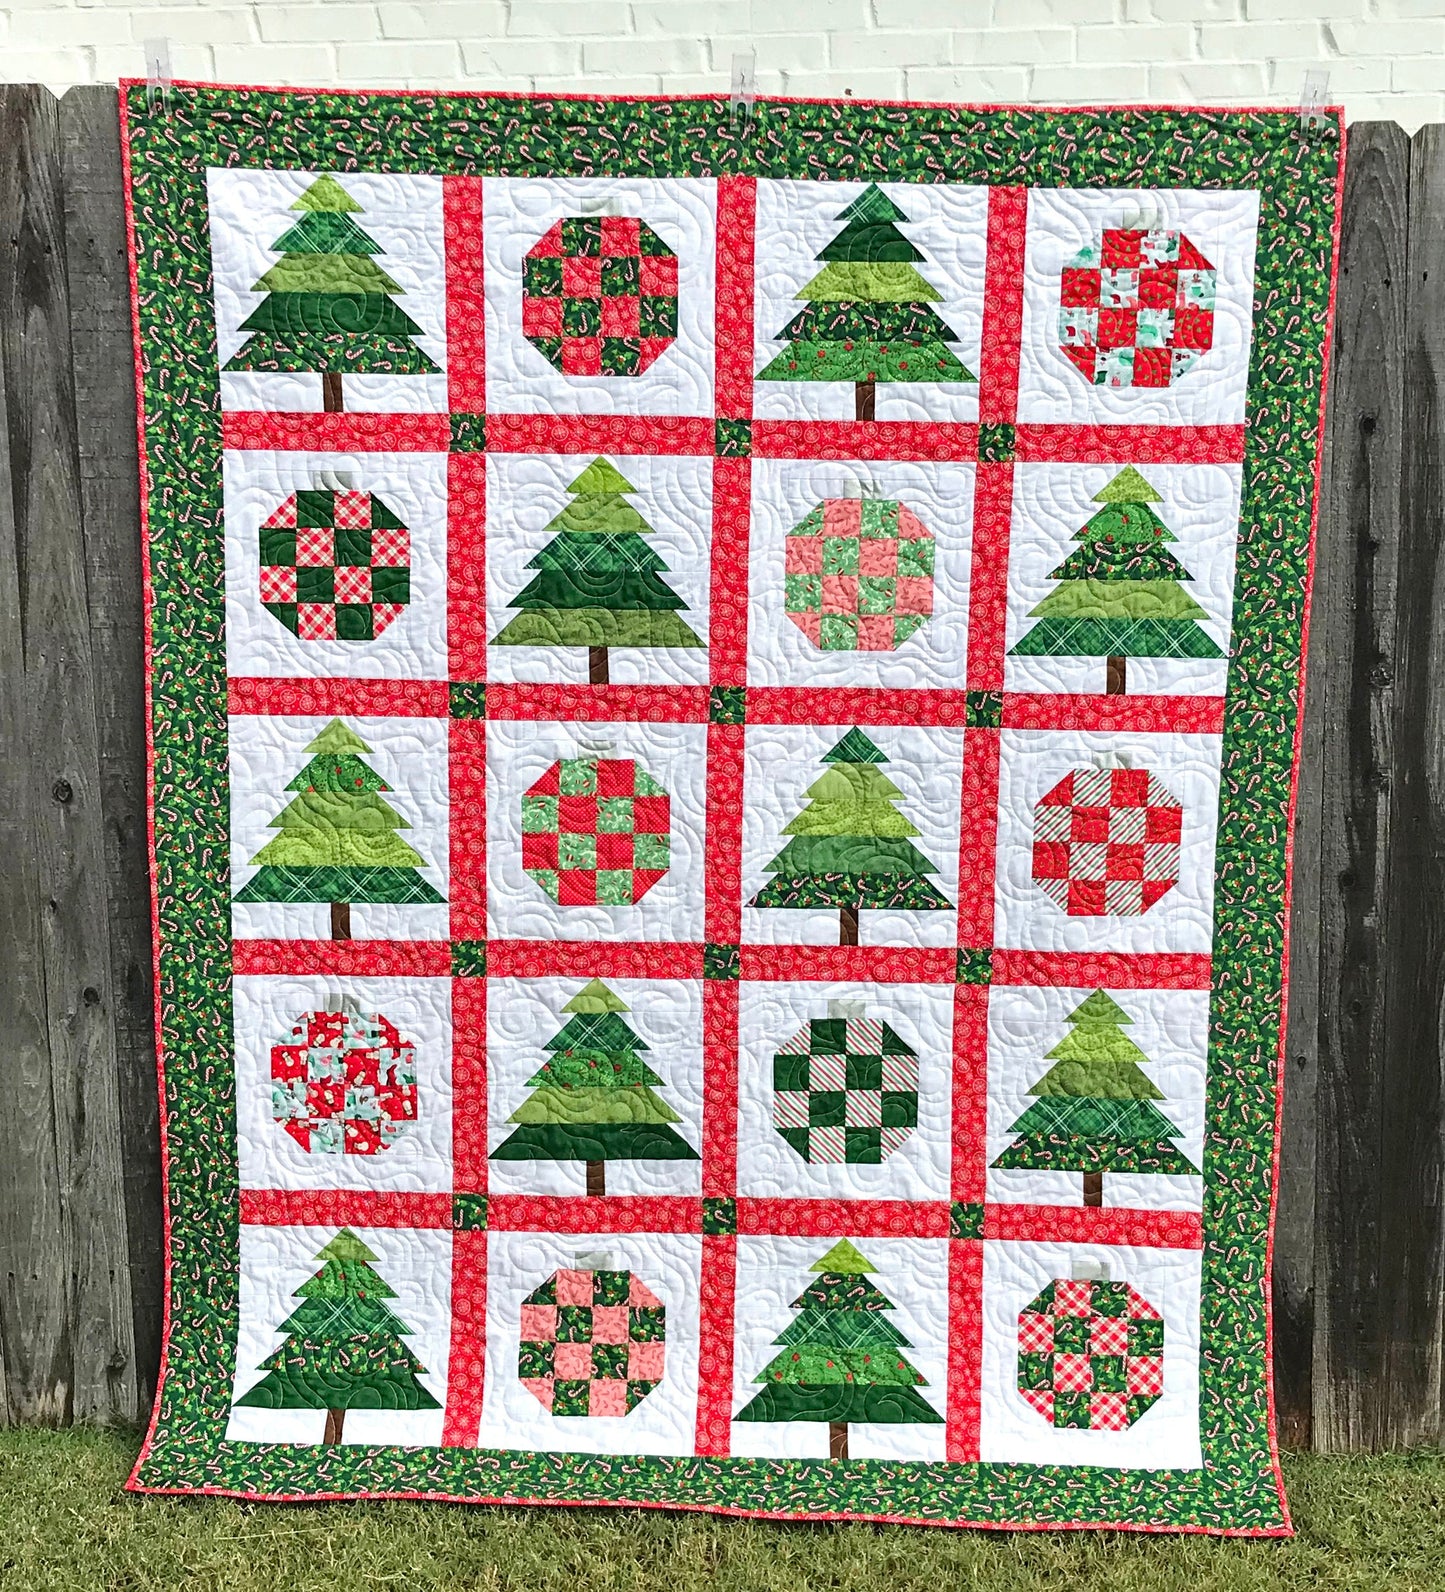 Christmastime quilt pattern with Christmas trees and ornament blocks surrounded by red sashing and a green holly border. Quilt is shown hanging on a fence.